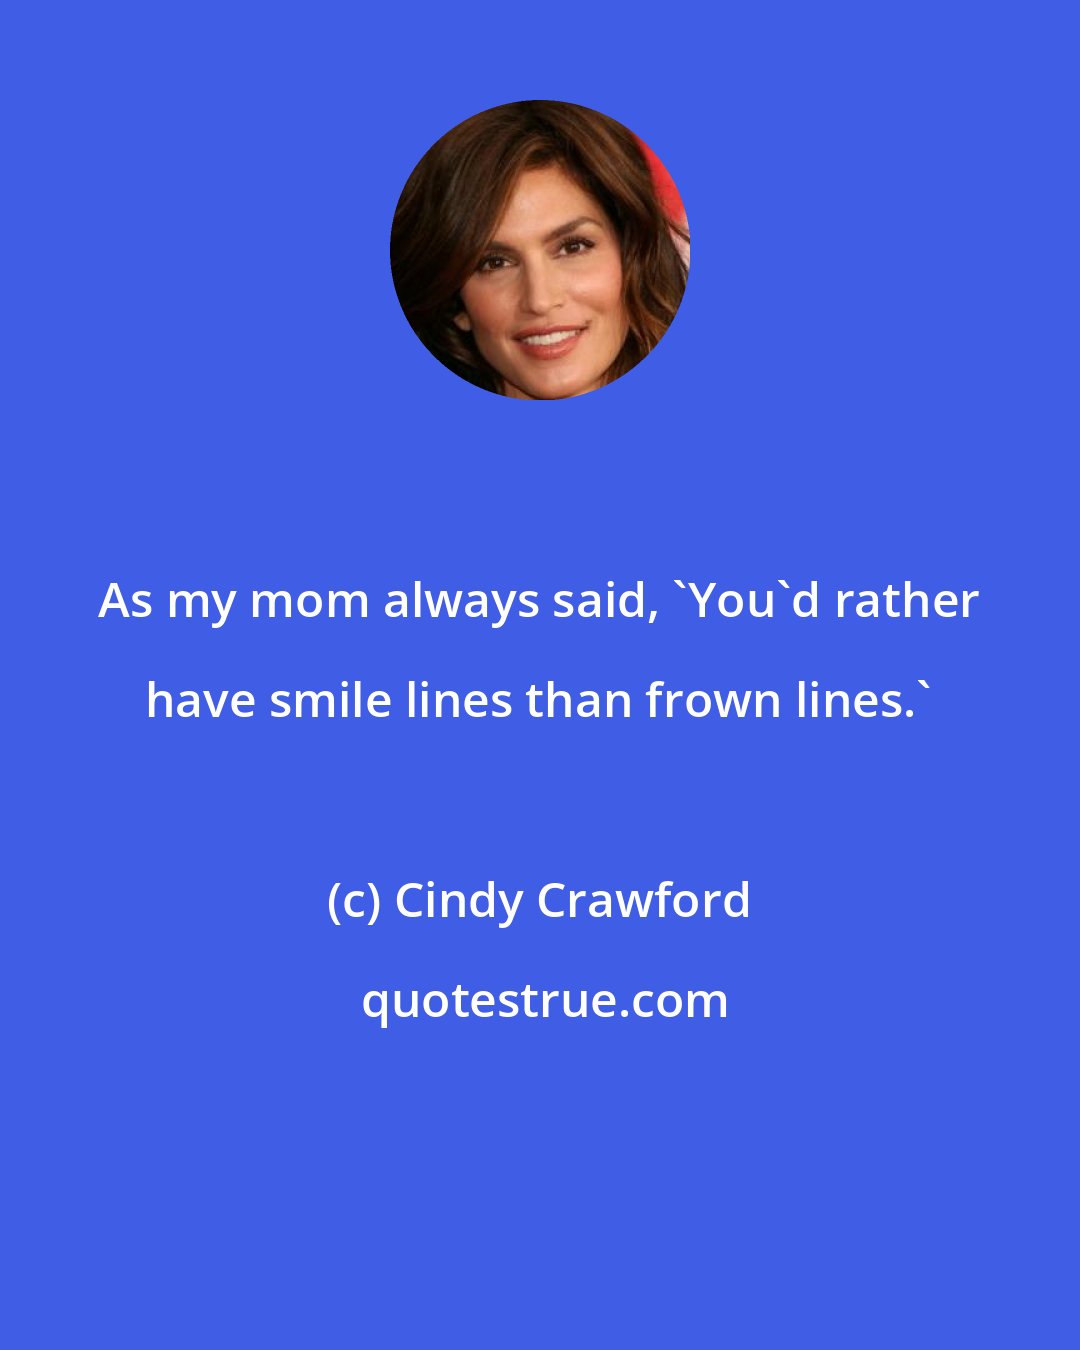 Cindy Crawford: As my mom always said, 'You'd rather have smile lines than frown lines.'